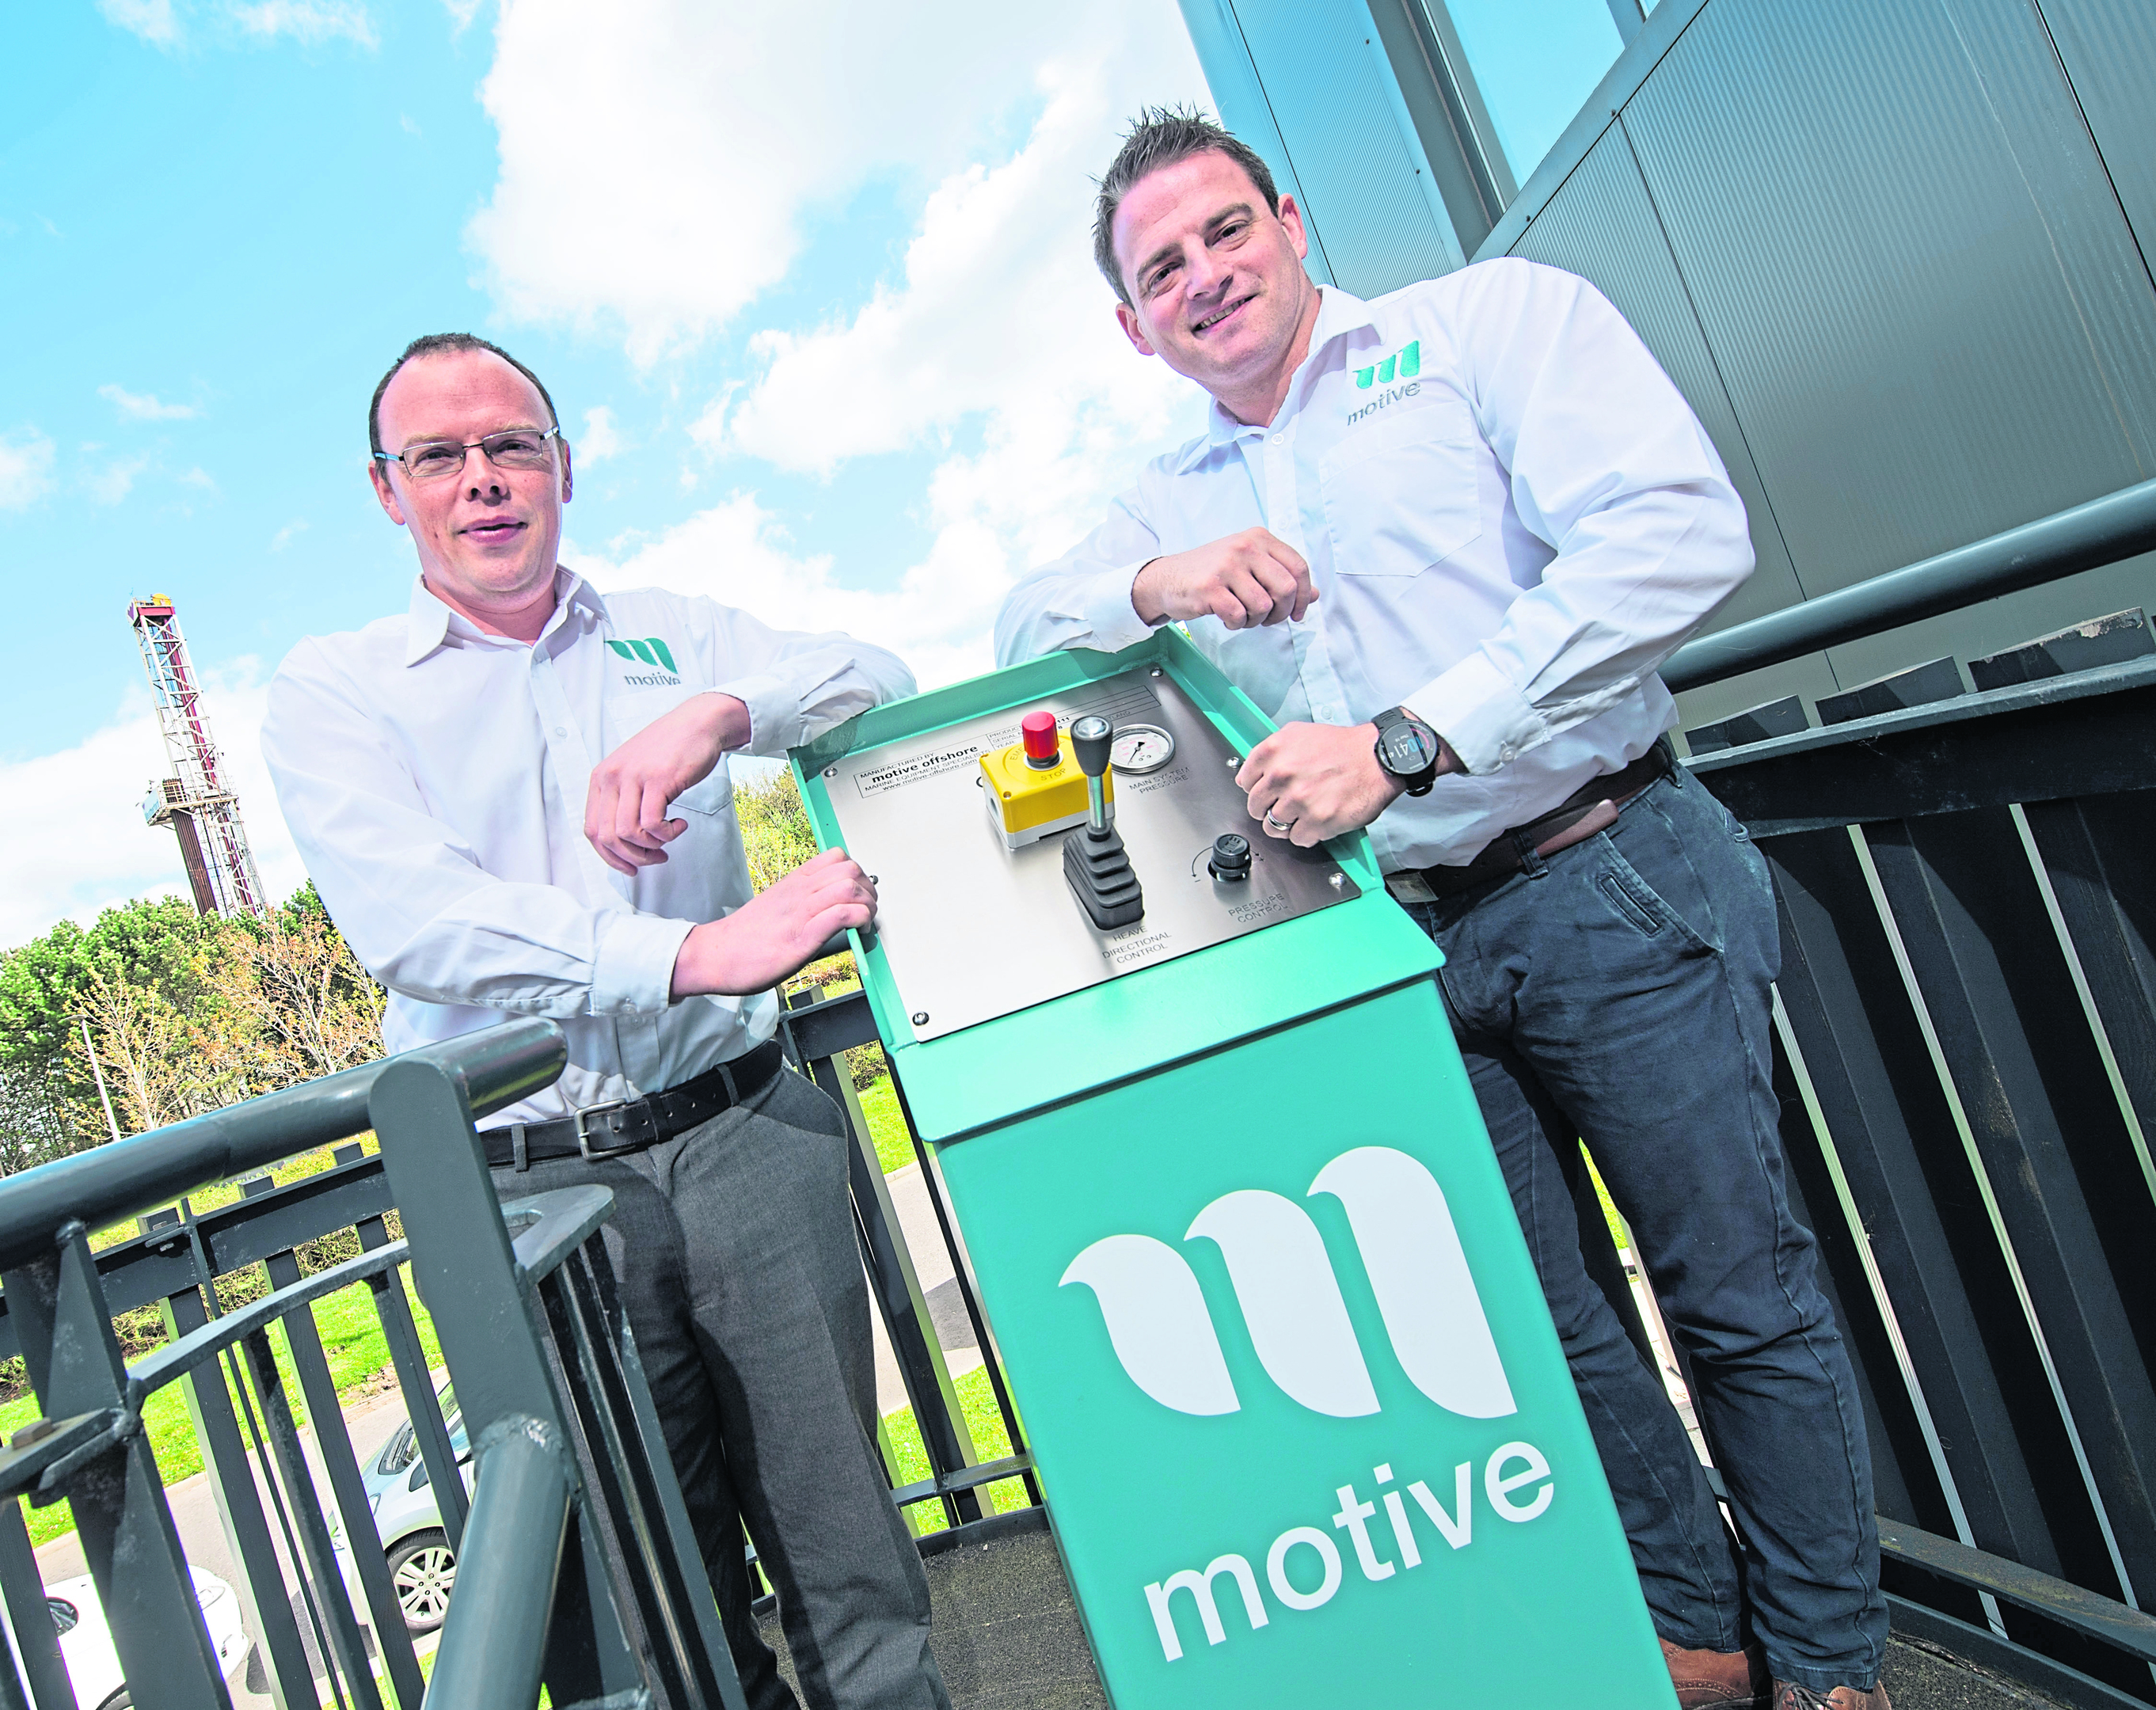 Motive Offshore Group director James Gregg, left, and Dave Acton